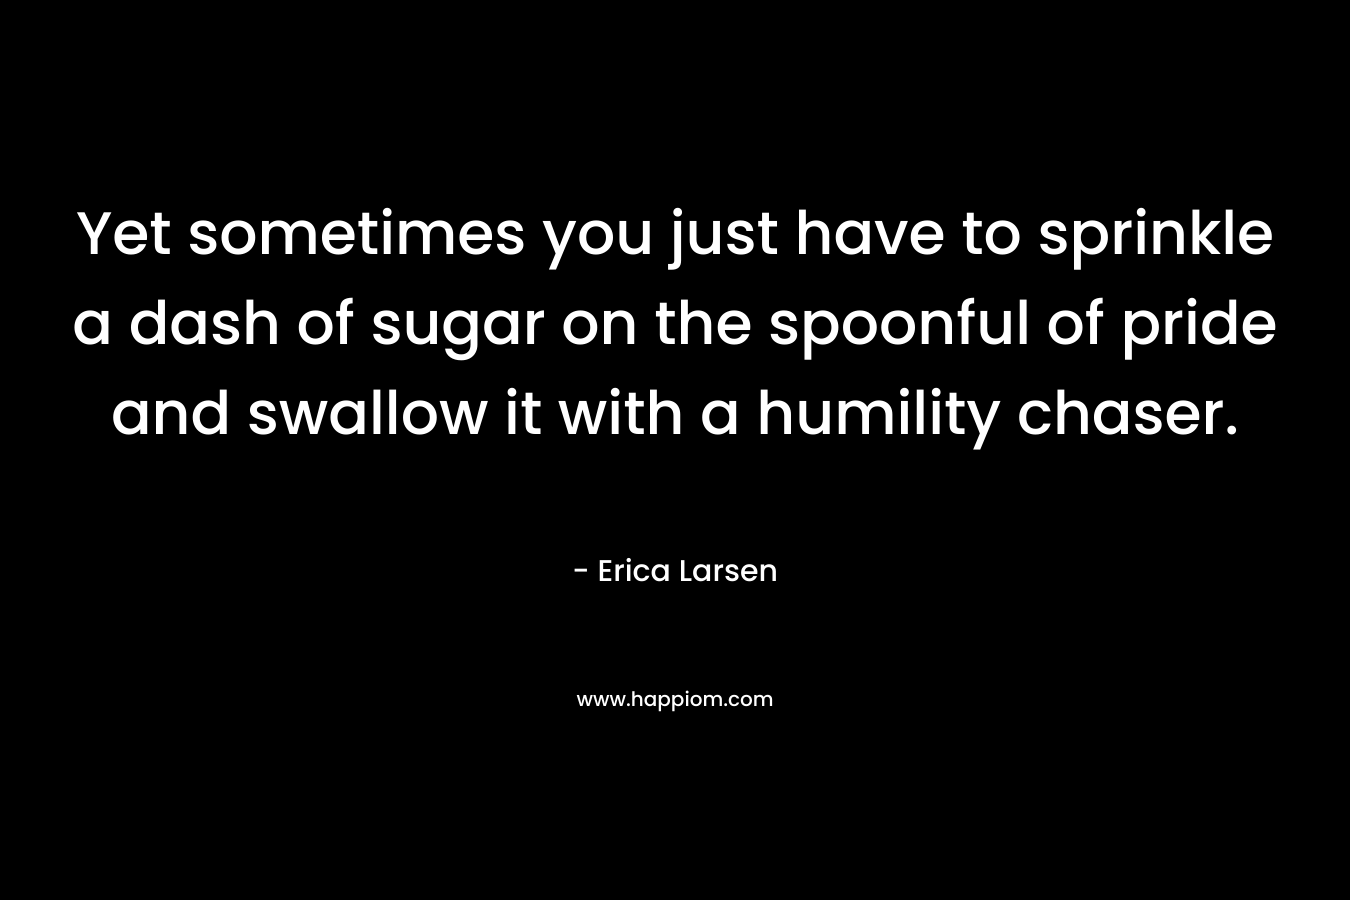 Yet sometimes you just have to sprinkle a dash of sugar on the spoonful of pride and swallow it with a humility chaser. – Erica Larsen